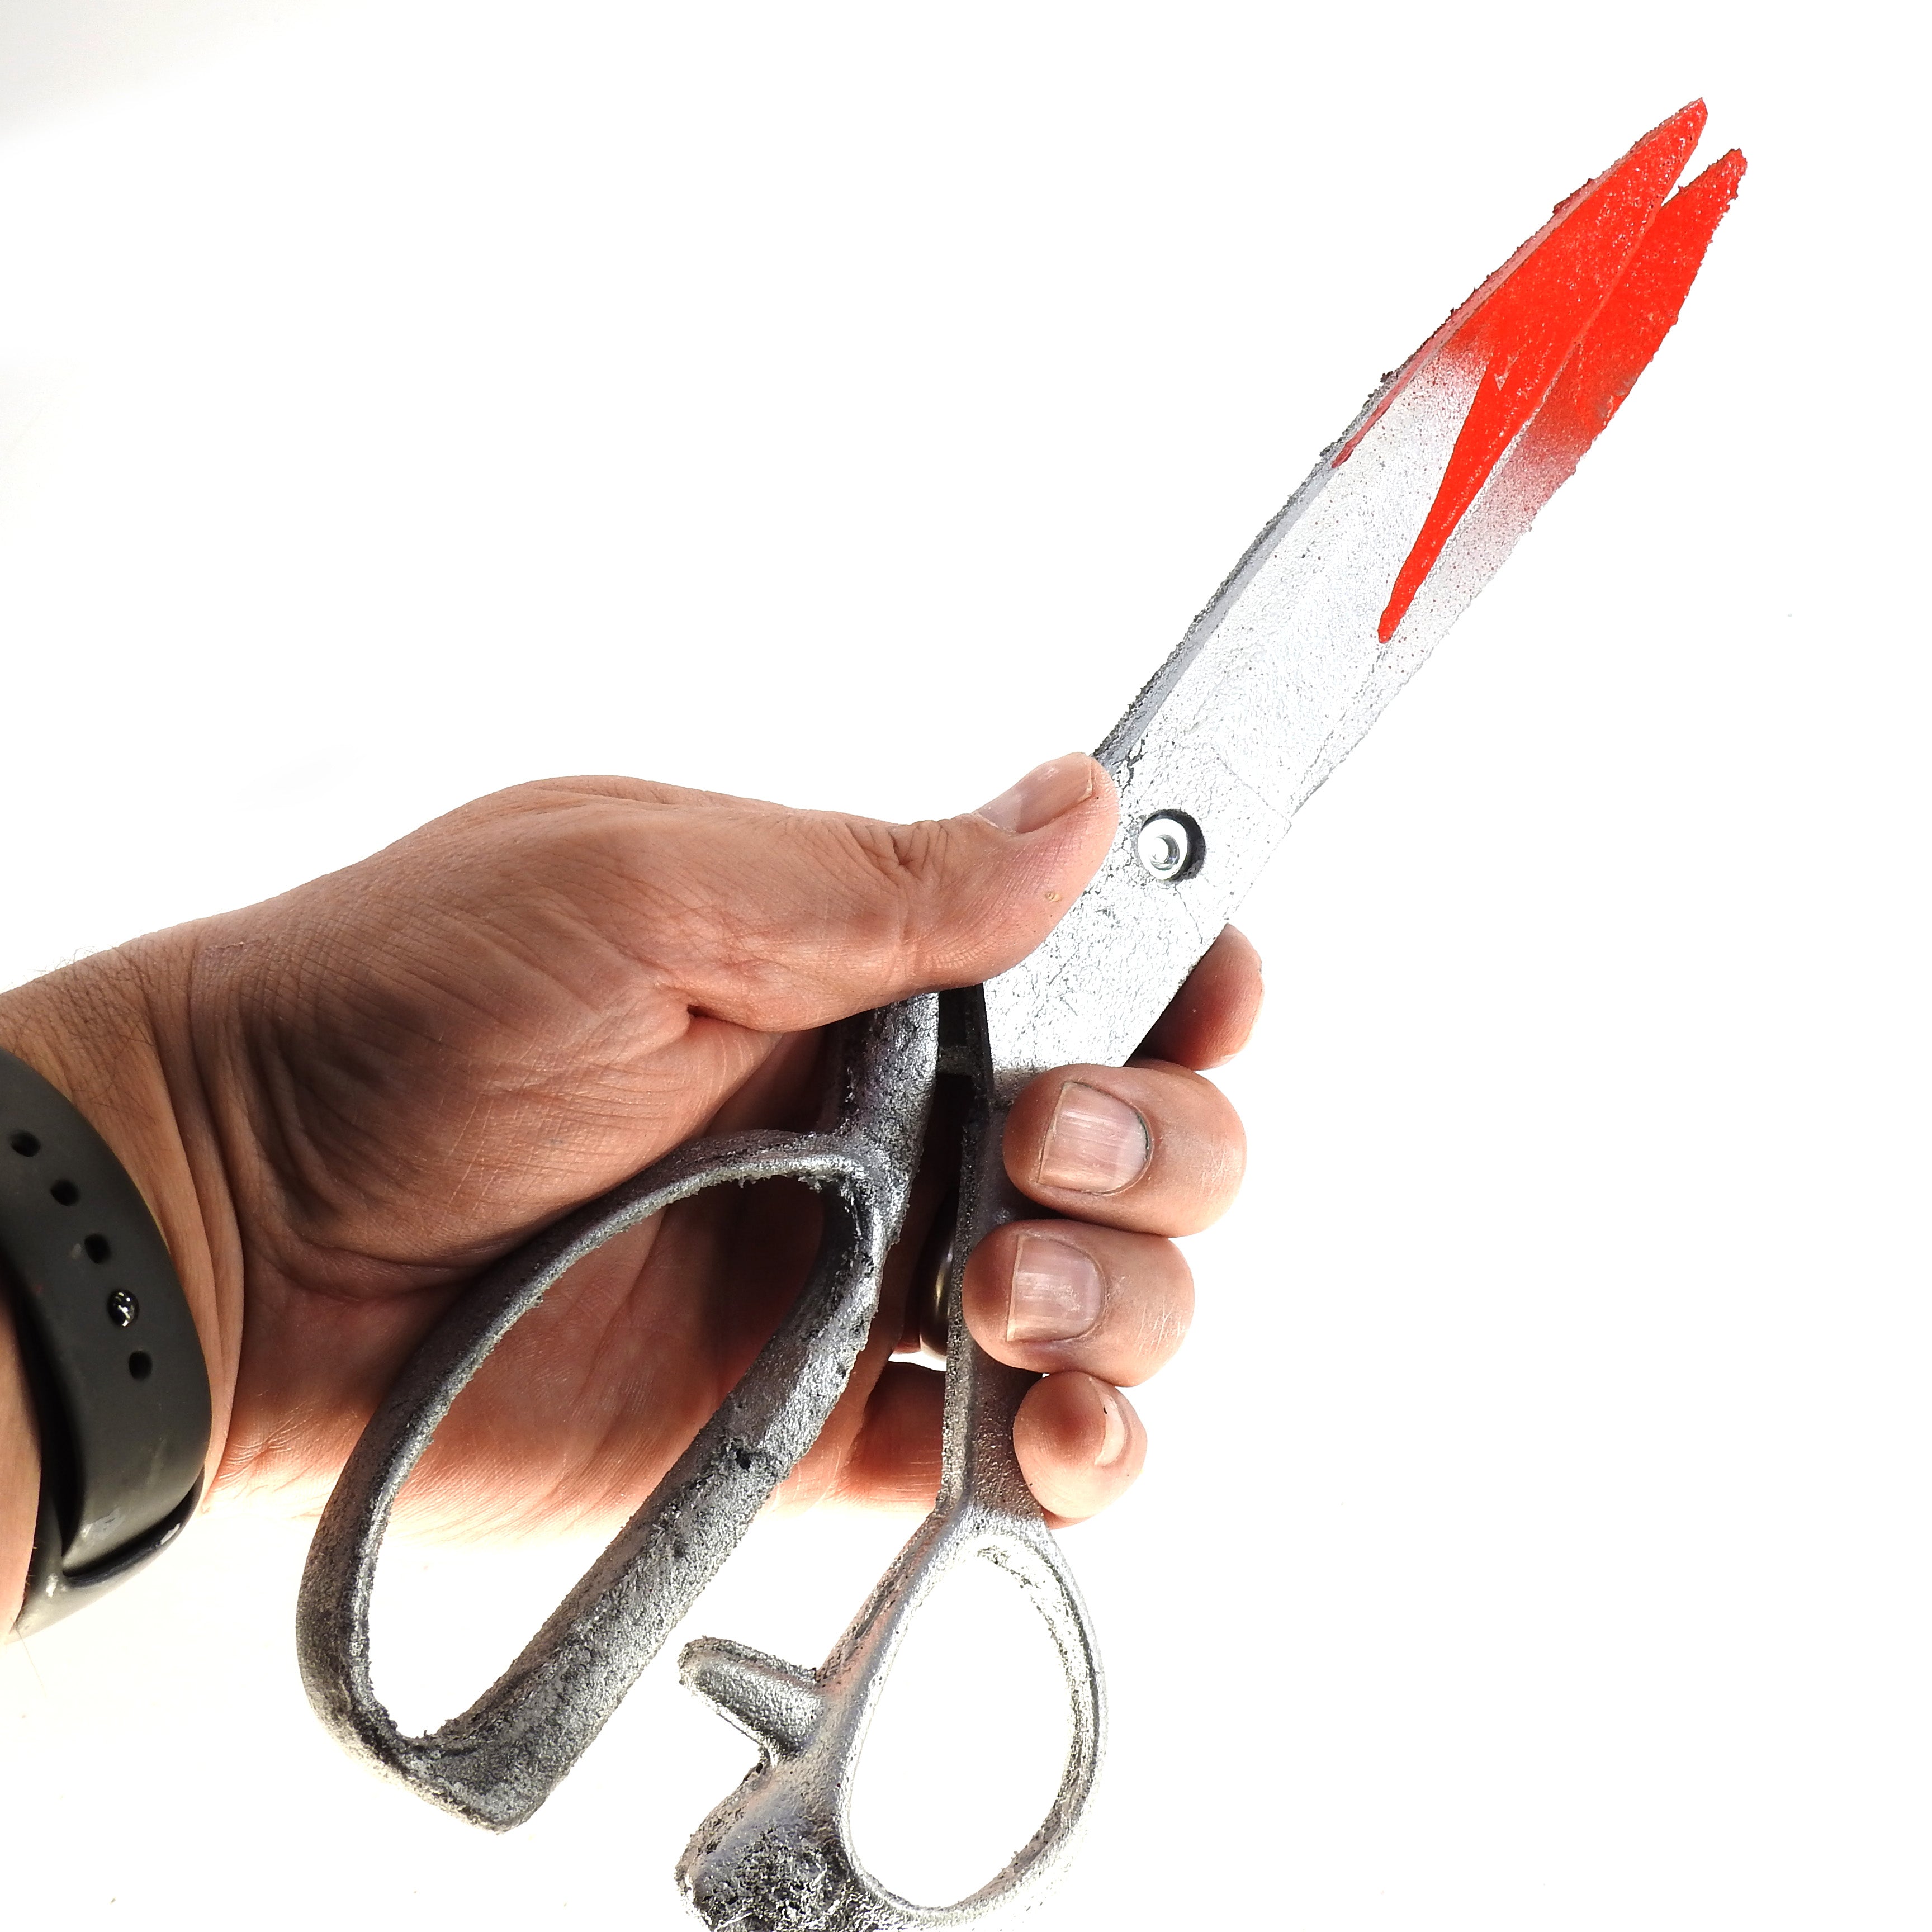 Large Foam Rubber Scissors or Shears with Functional Moving Parts - Bloody - Bloodied Chrome